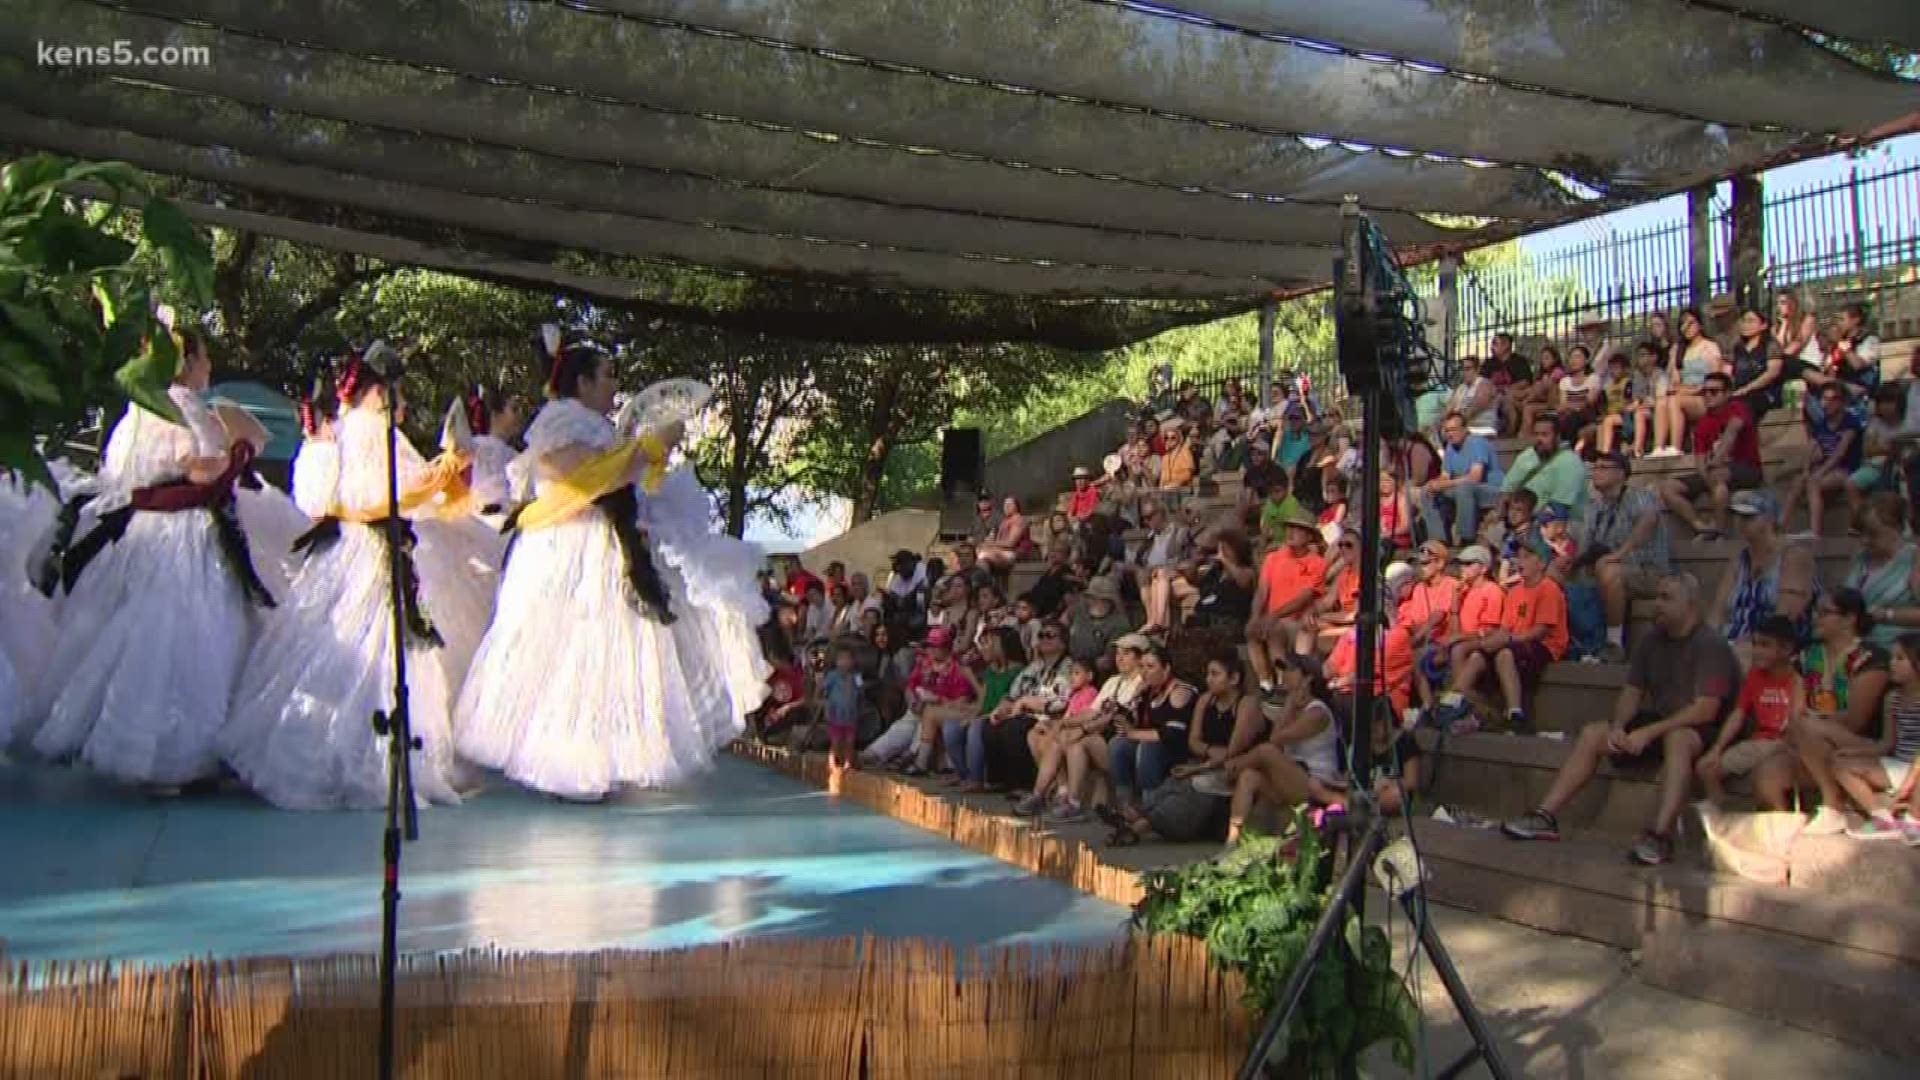 The Texas Folklife Festival features all kinds of cultures from throughout the Lone Star State.